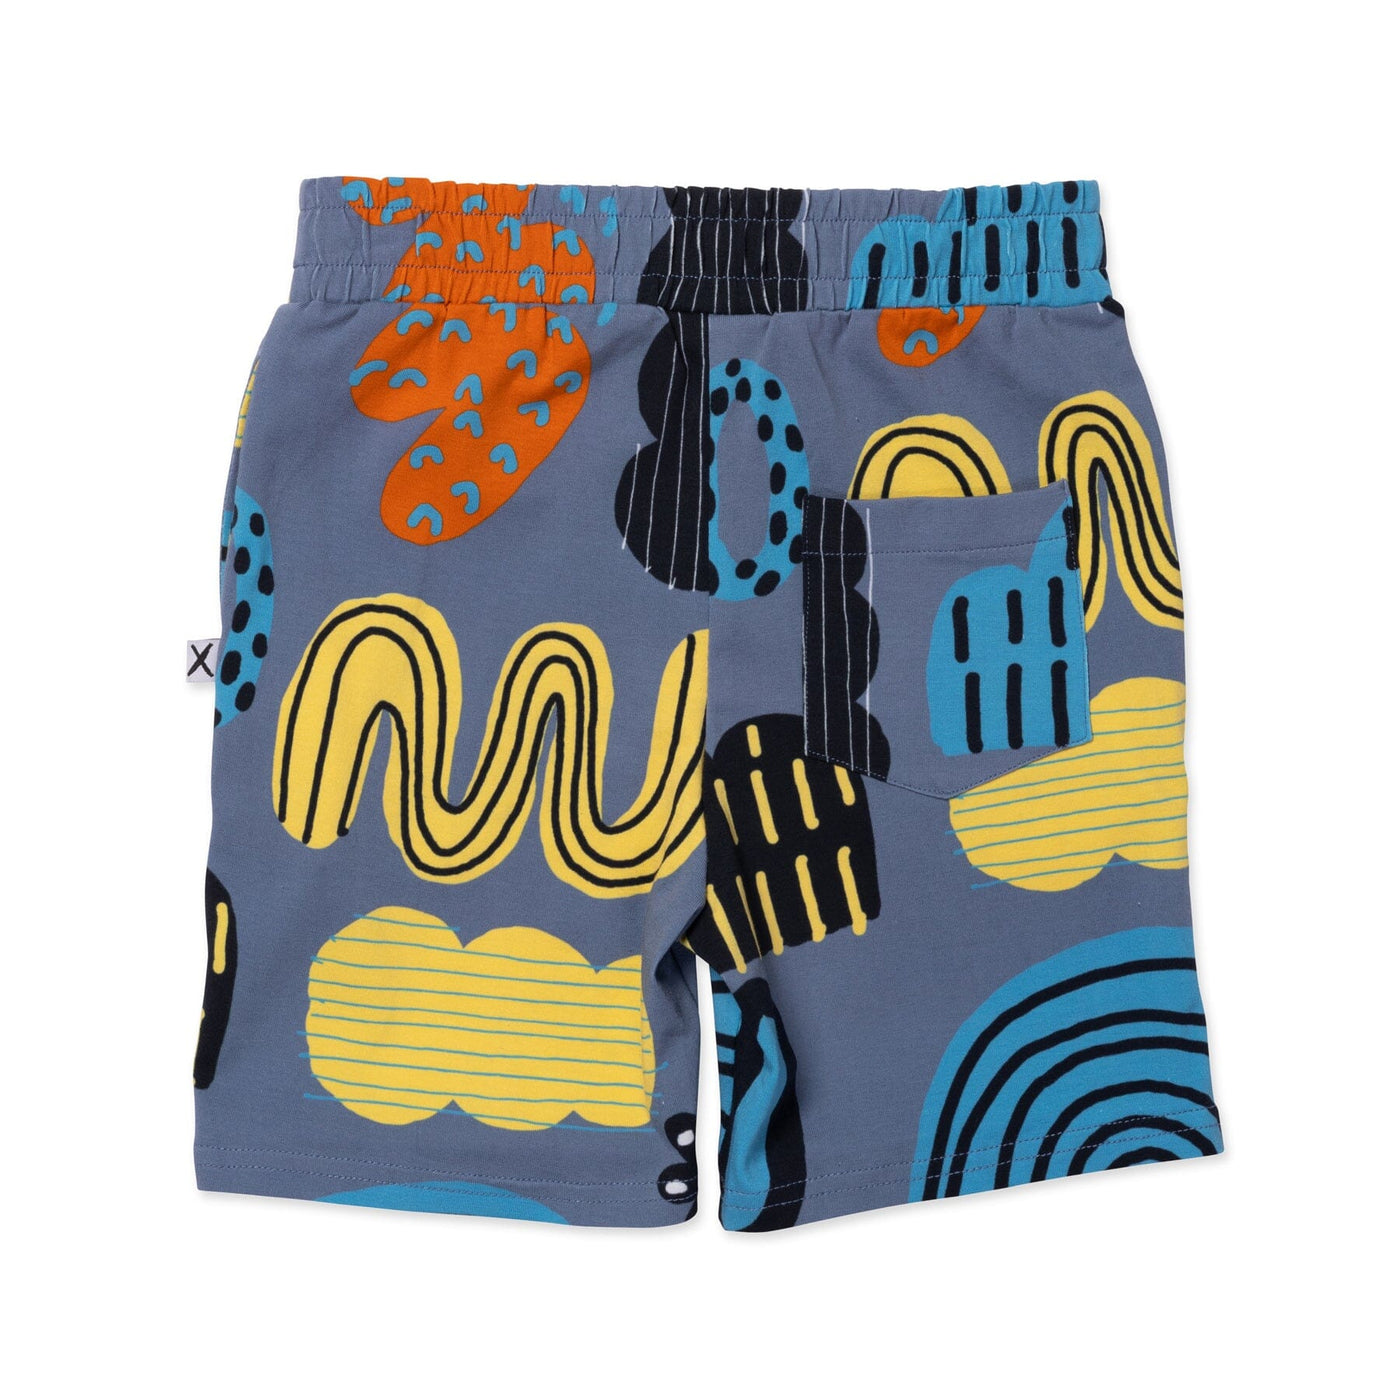 PREORDER Minti Weather Things Short - Steel Shorts Minti 